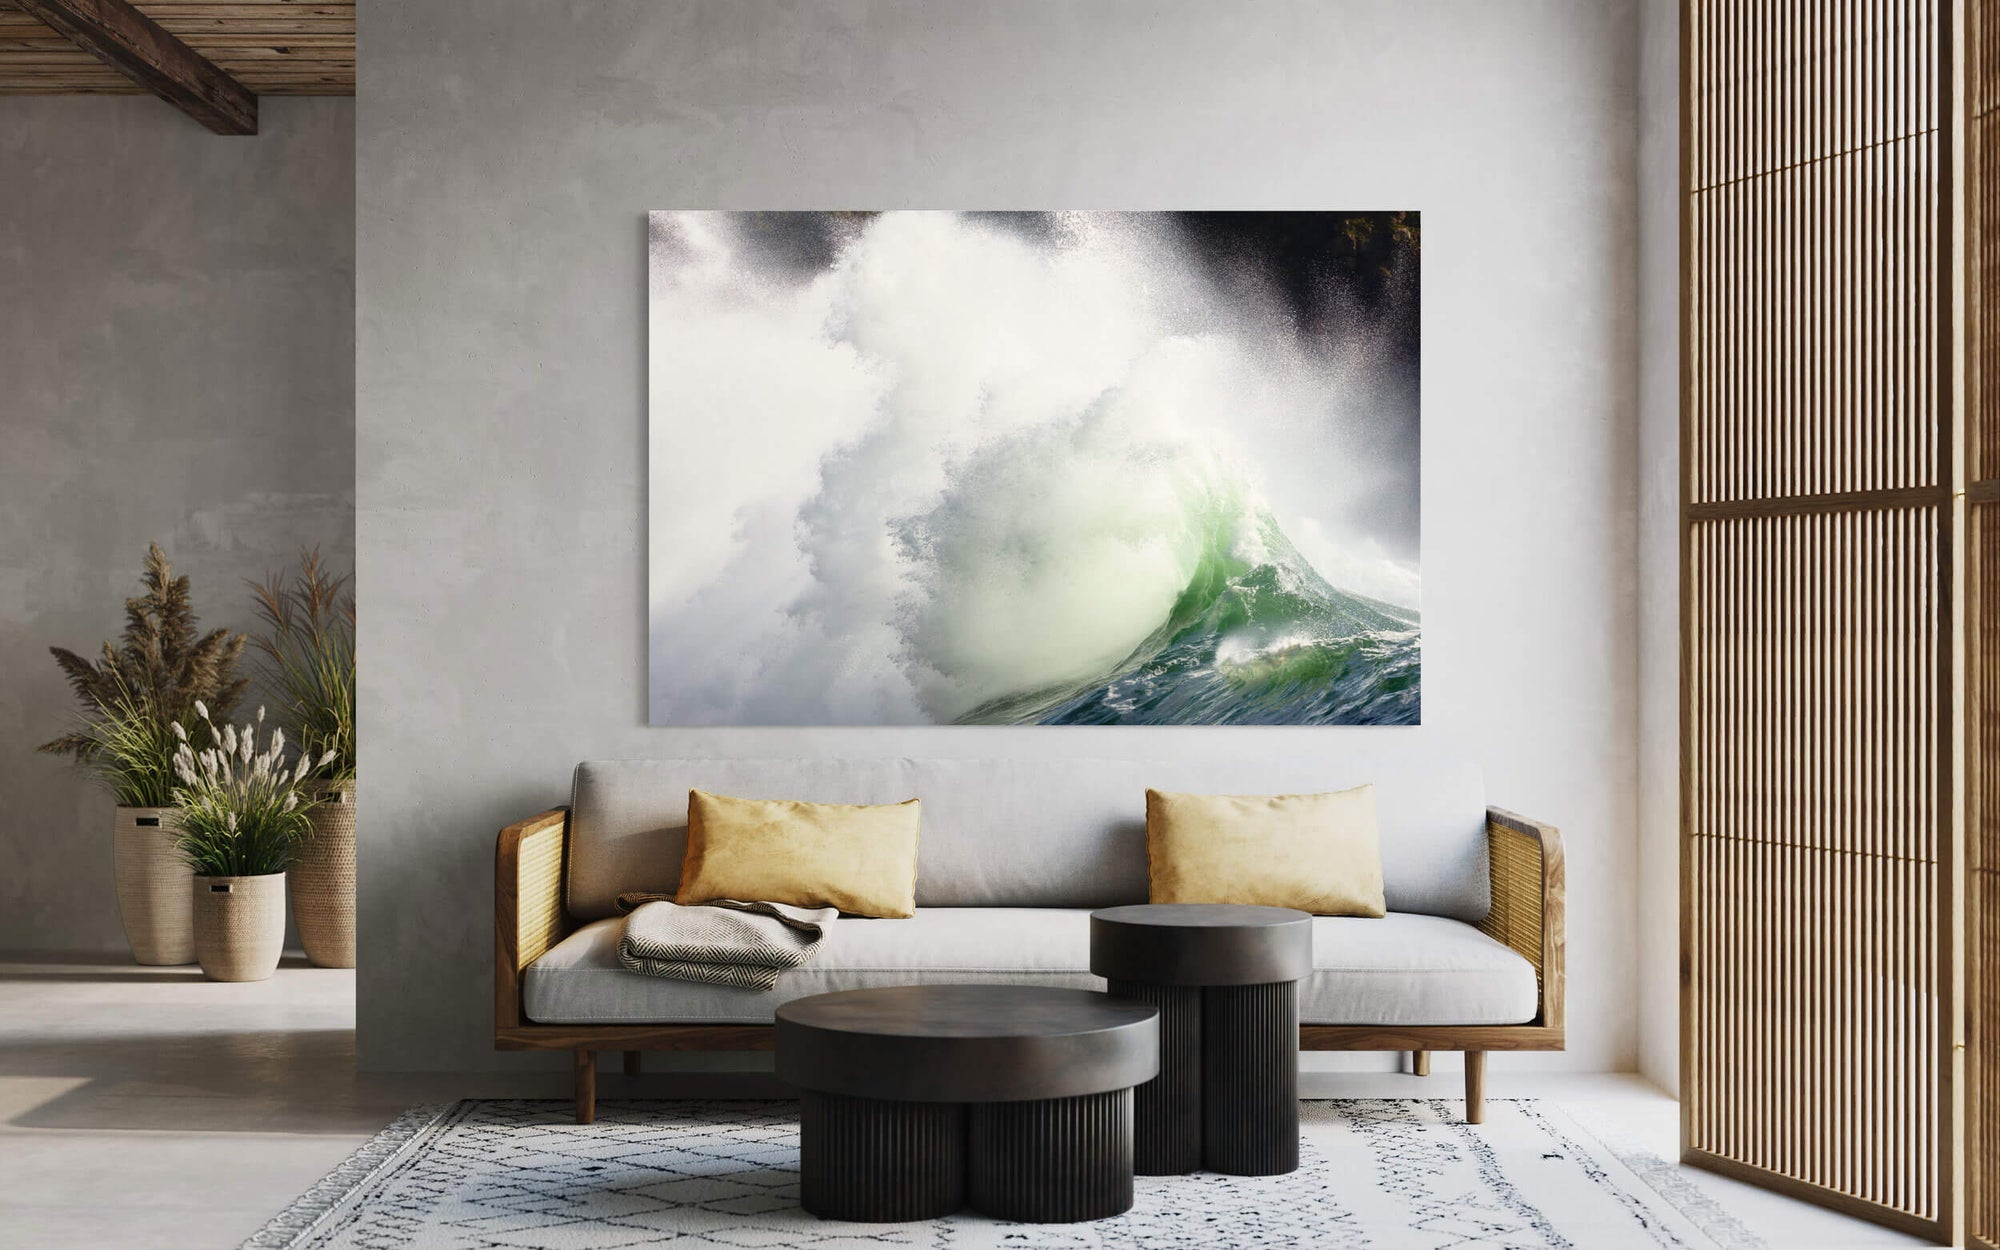 A piece of art showing a Cape Disappointment waves picture hangs in a living room.